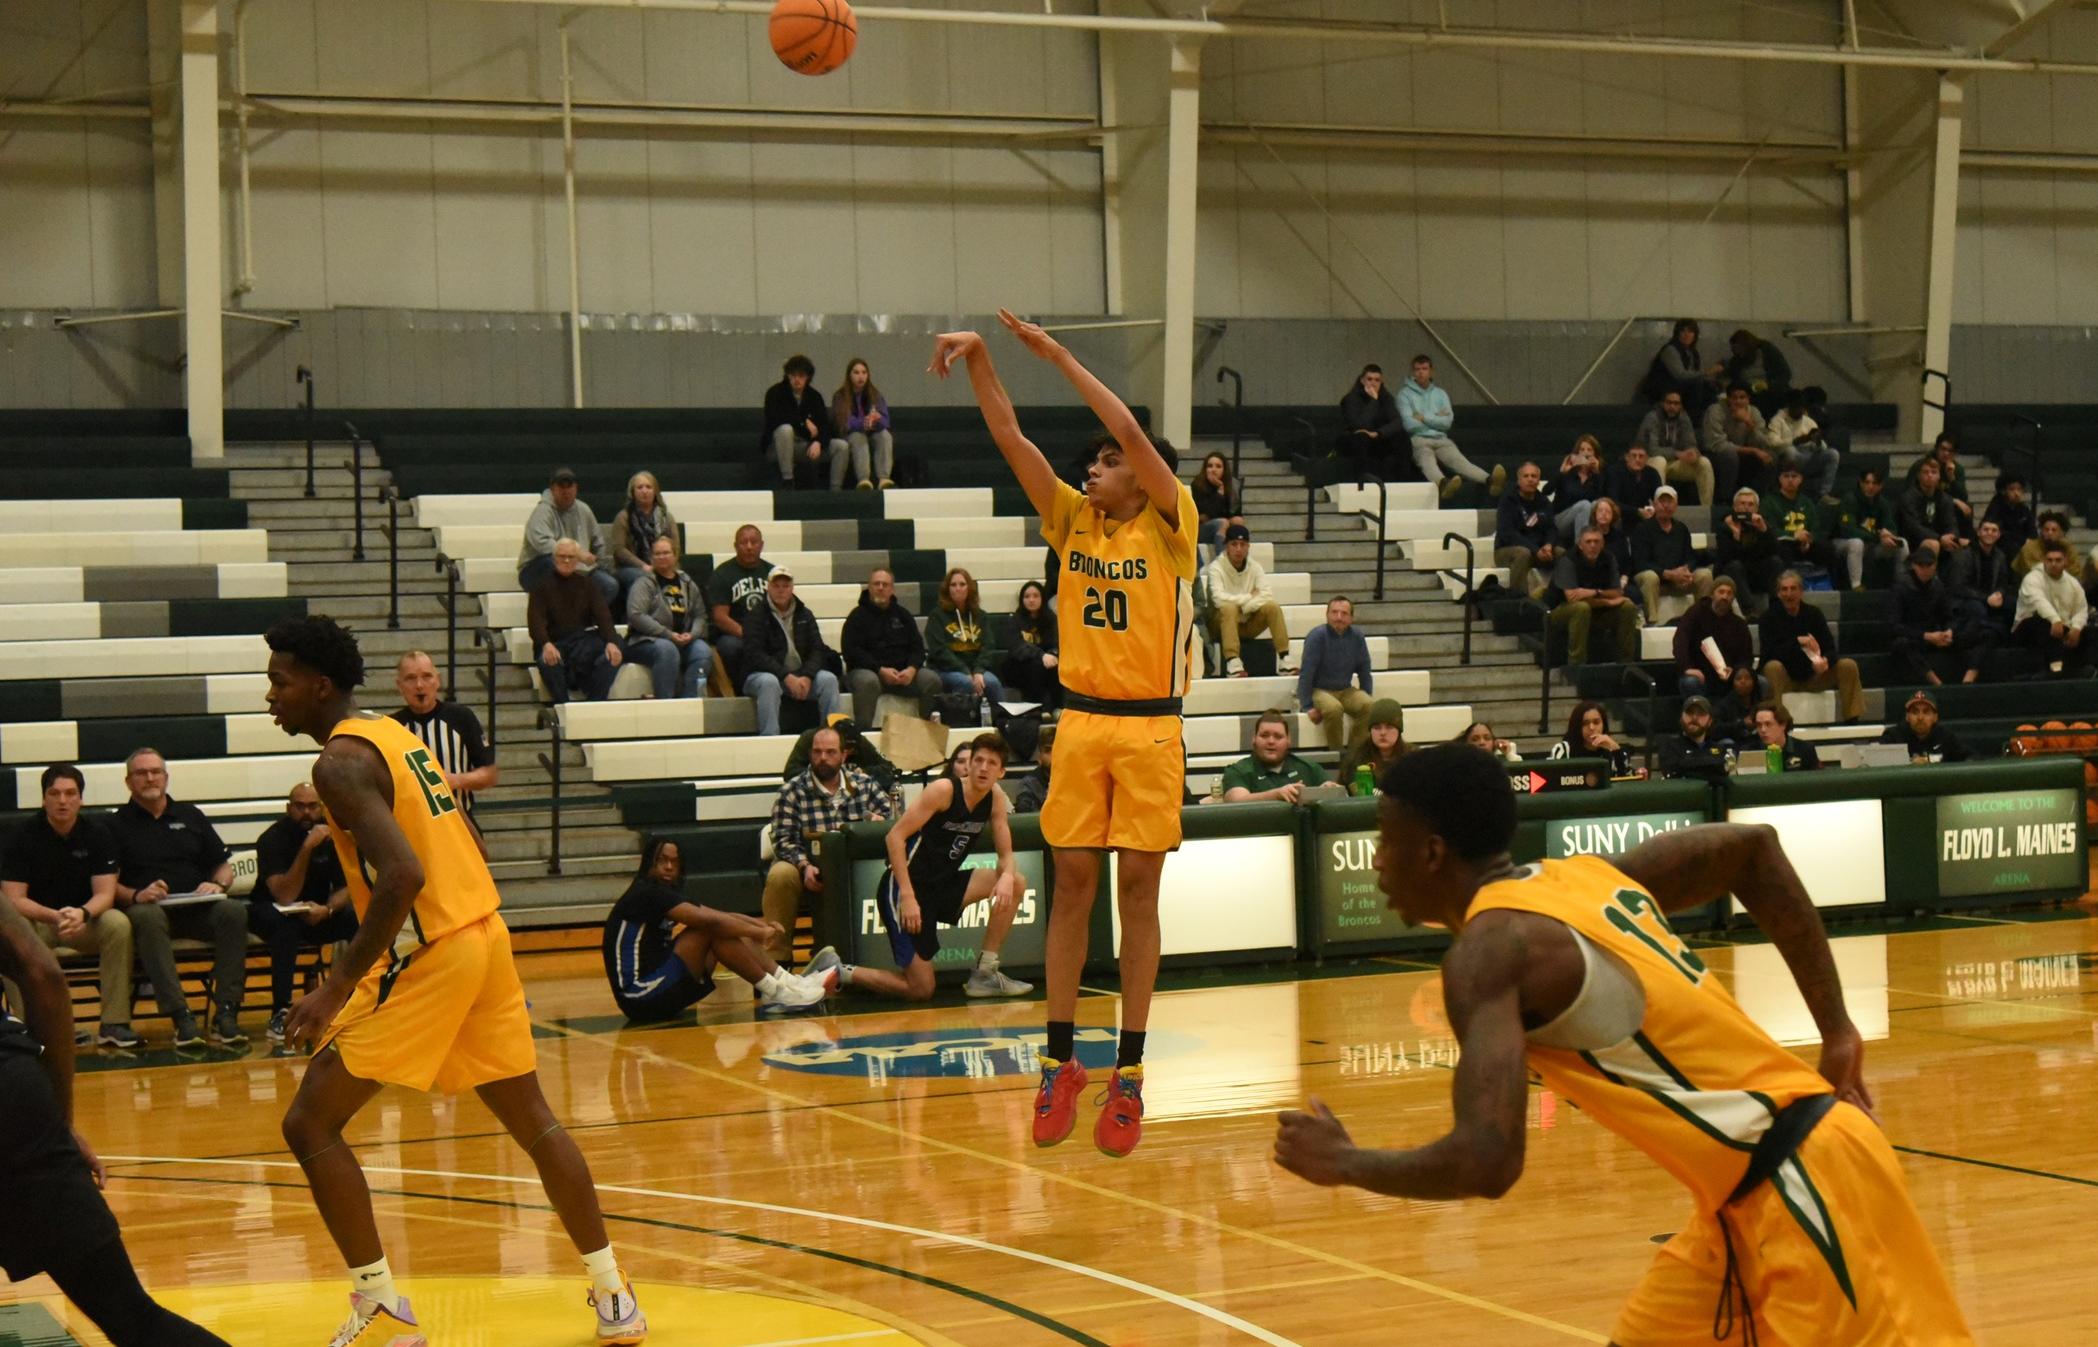 Men’s Basketball starts the year off in style with big win over Bard; Quinones breaks Block Record with huge night